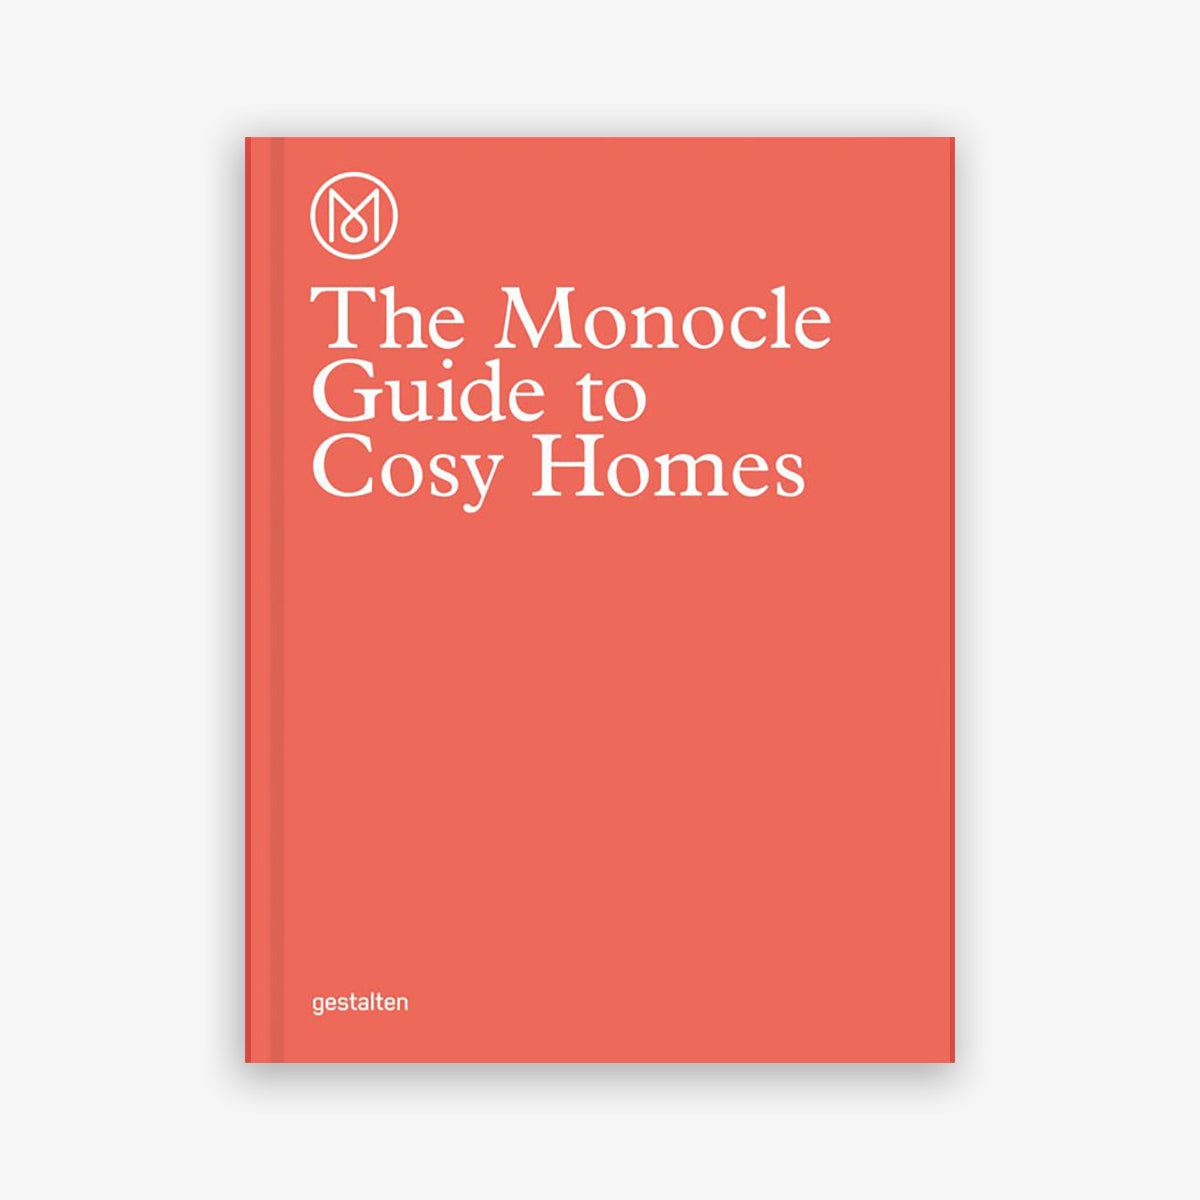 BOG 'THE MONOCLE GUIDE TO COSY HOMES'